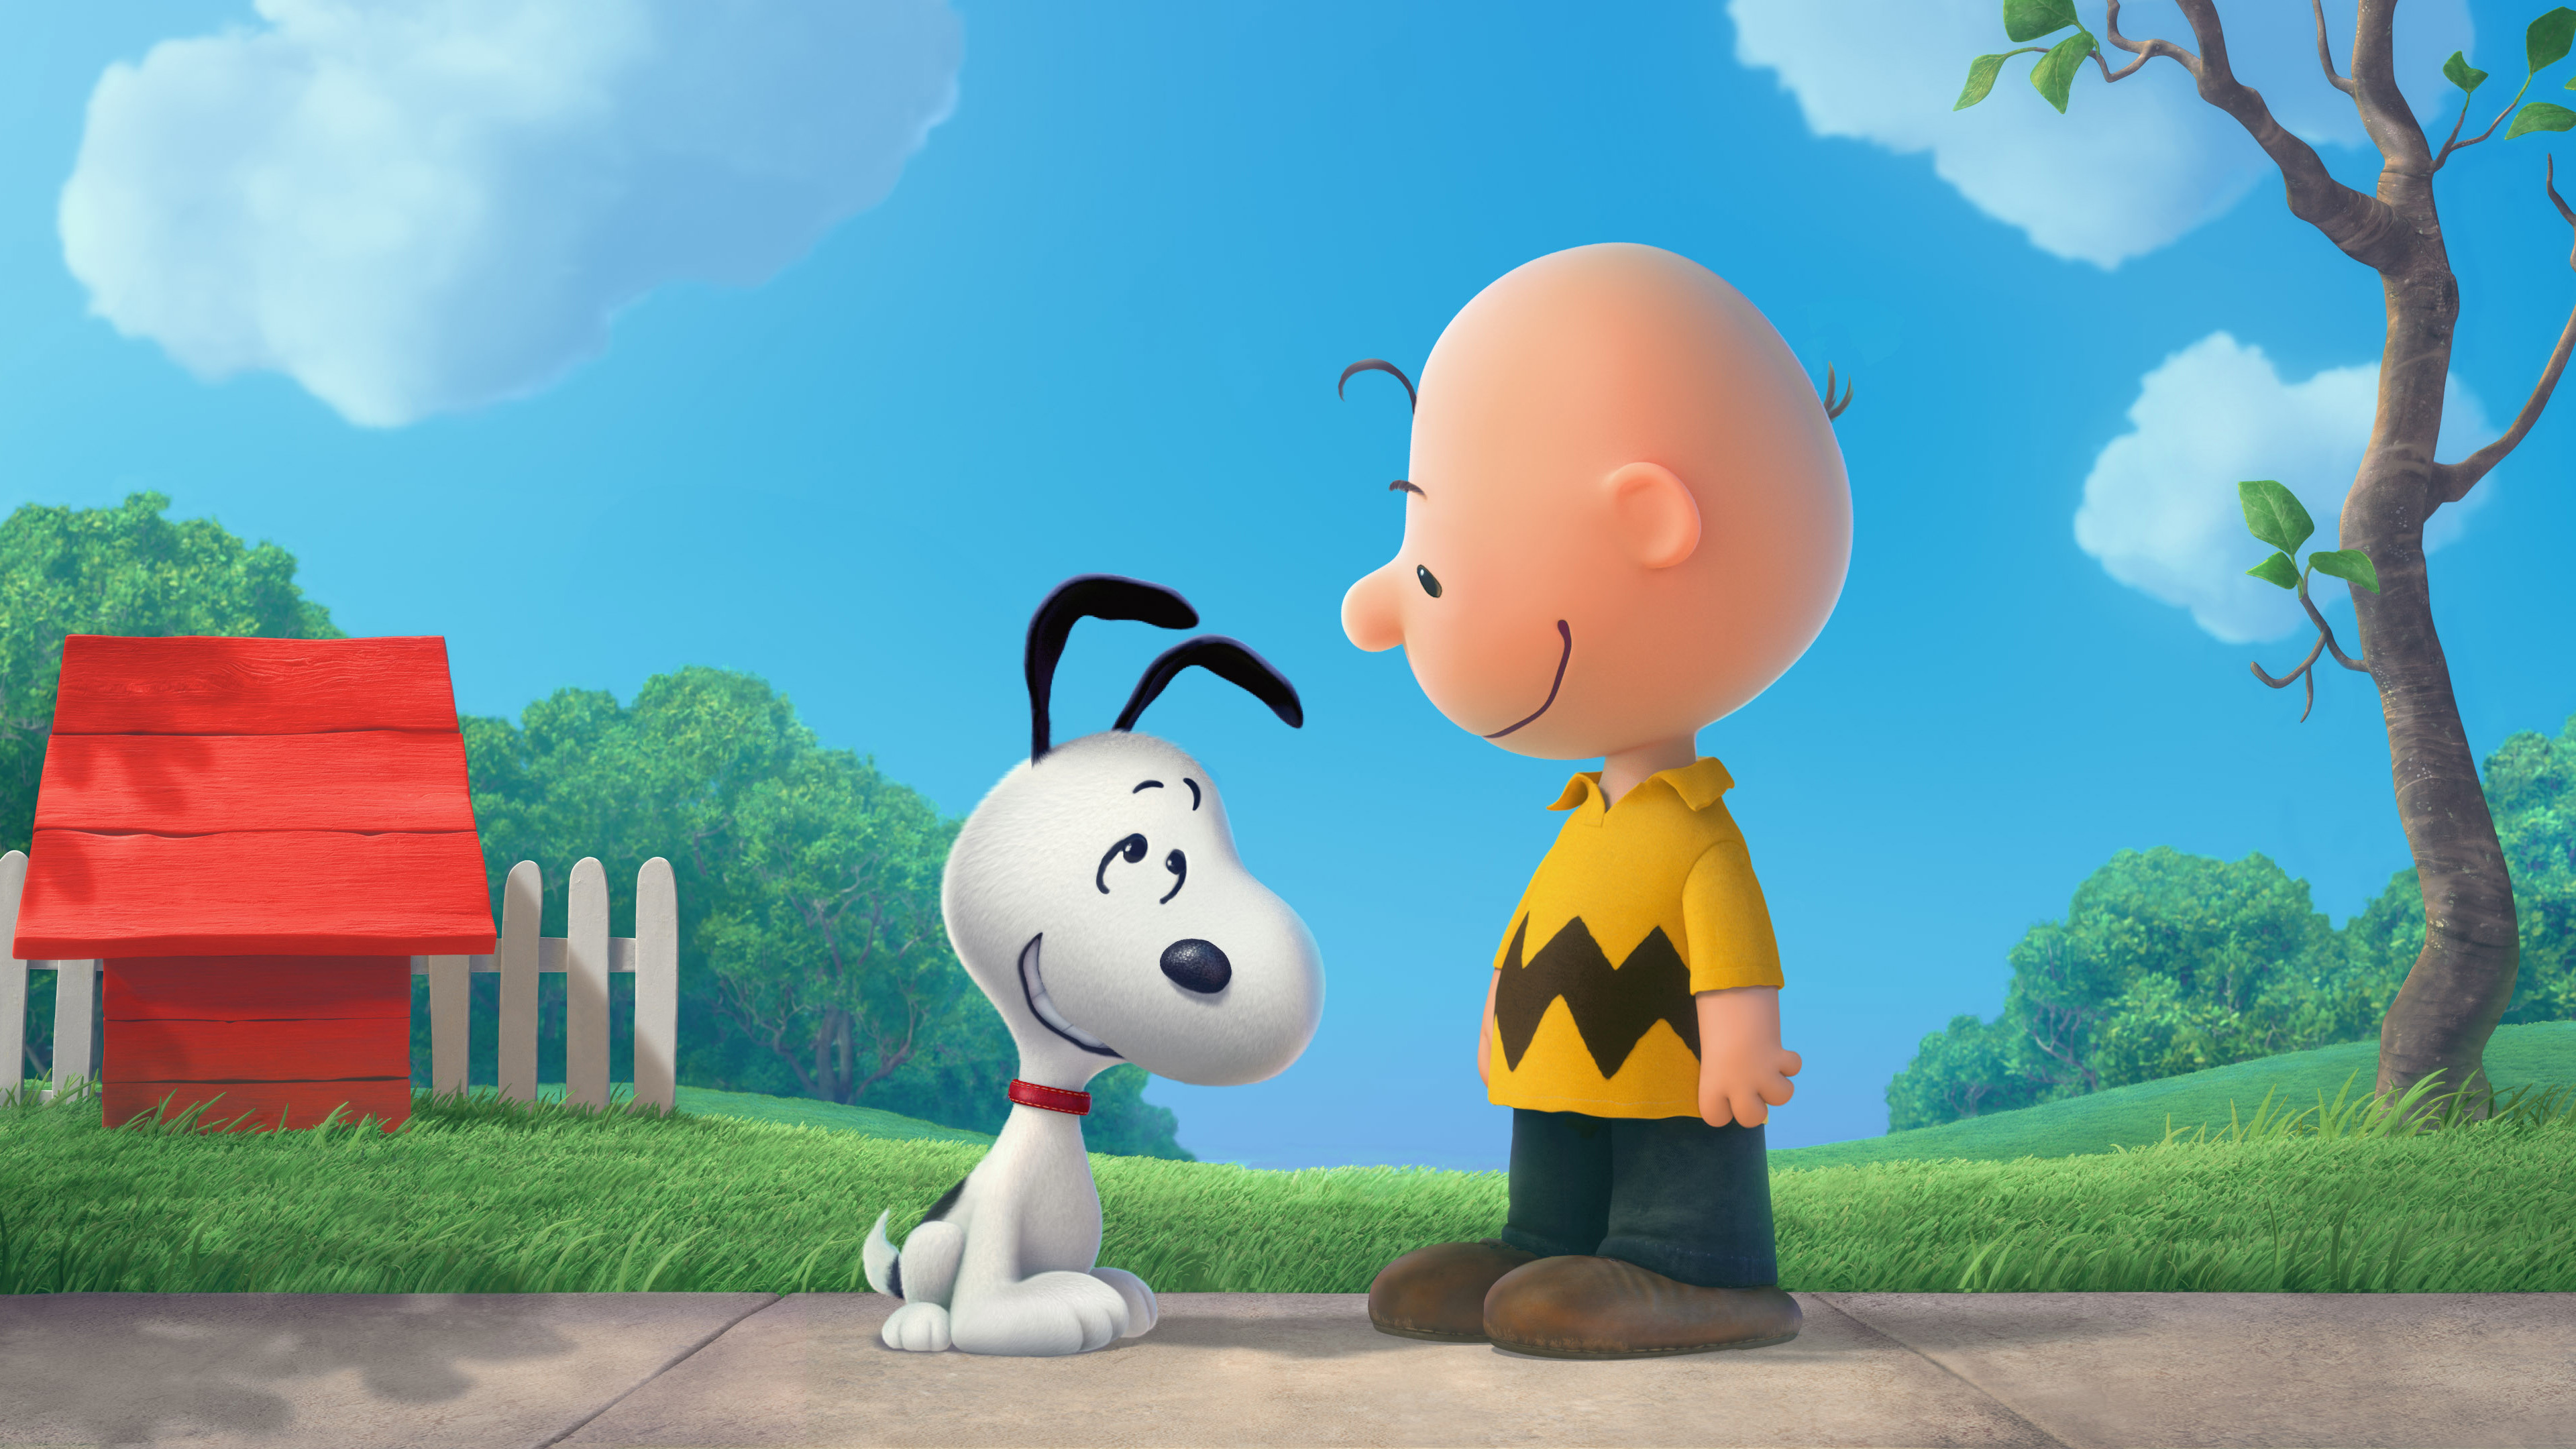 Snoopy And Charlie Brown The Peanuts Movie - HD Wallpaper 